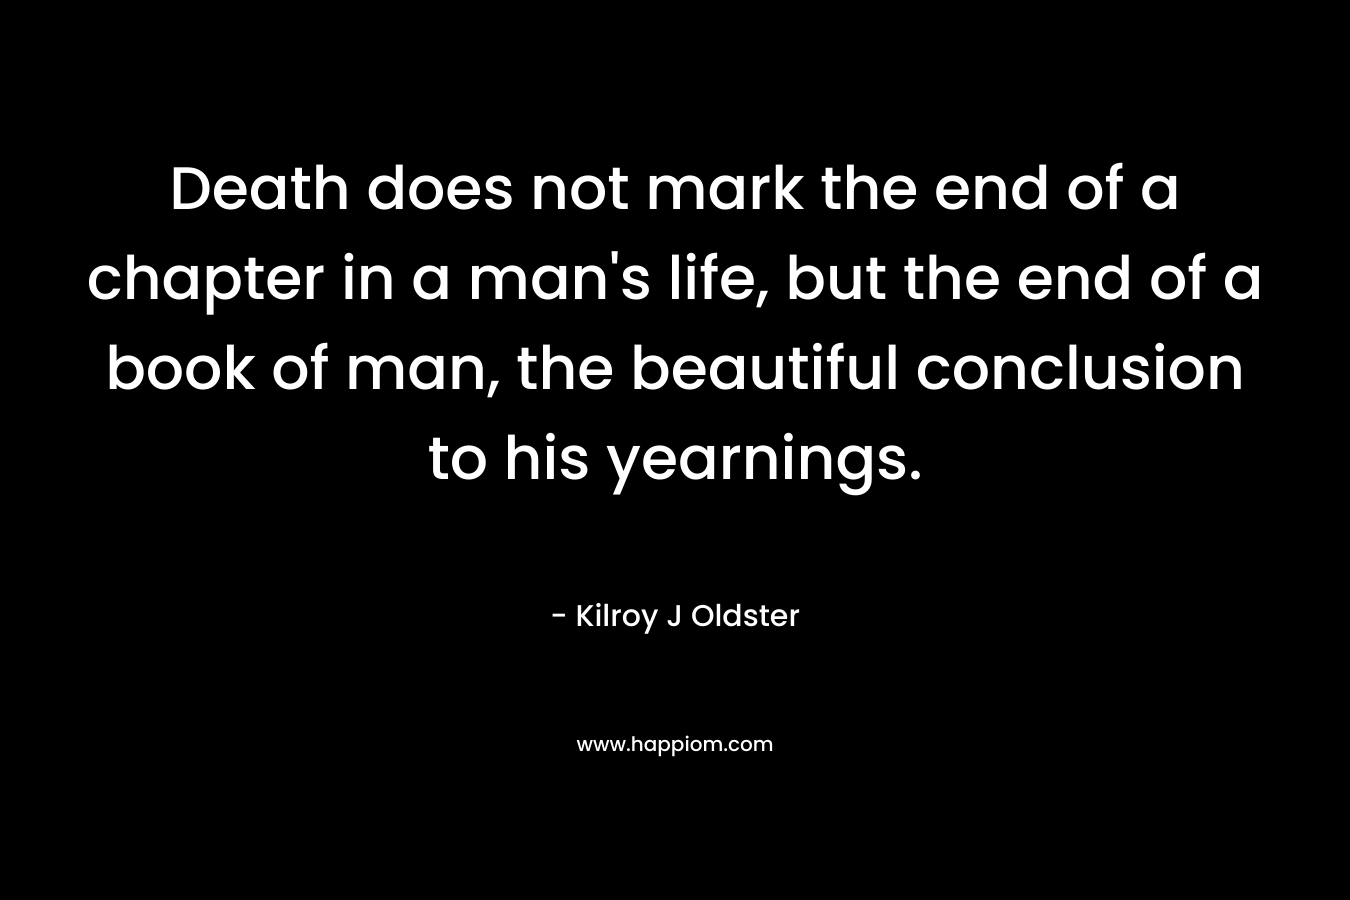 Death does not mark the end of a chapter in a man’s life, but the end of a book of man, the beautiful conclusion to his yearnings. – Kilroy J Oldster